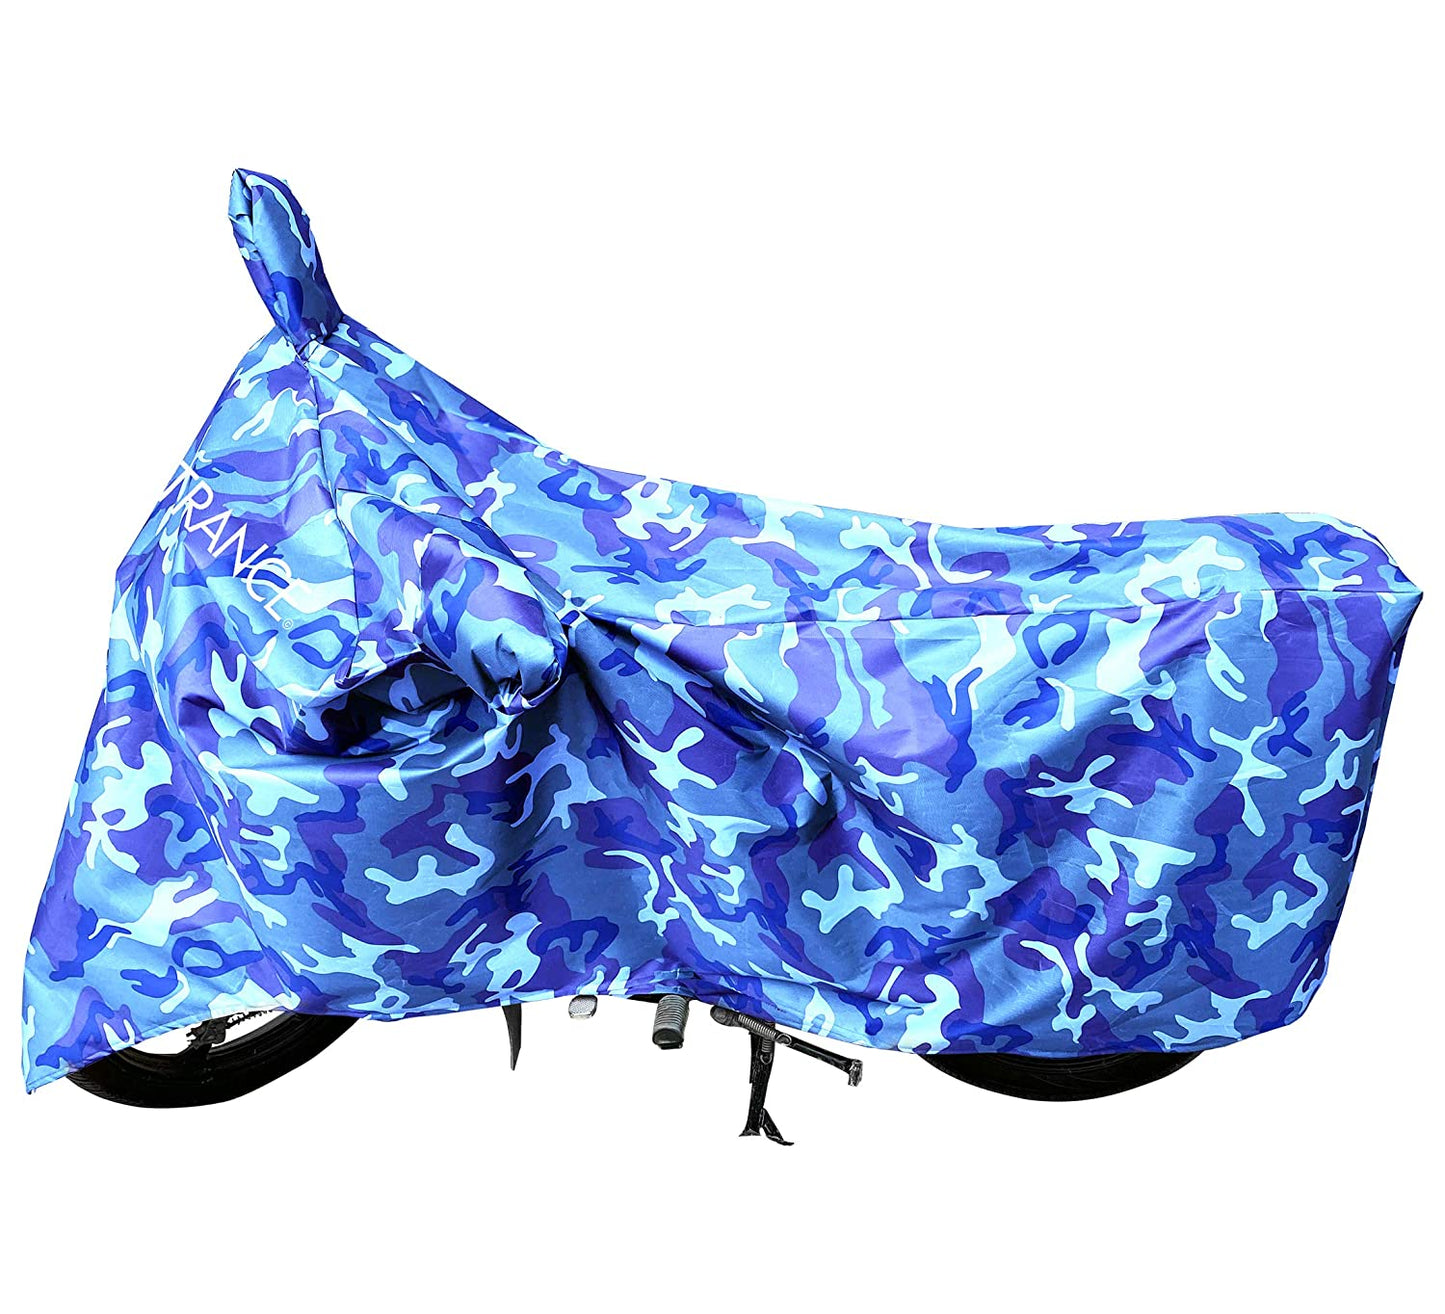 MotoTrance Jungle Bike Body Covers For Royal Enfield Electra - Interlock-Stitched Waterproof and Heat Resistant with Mirror Pockets